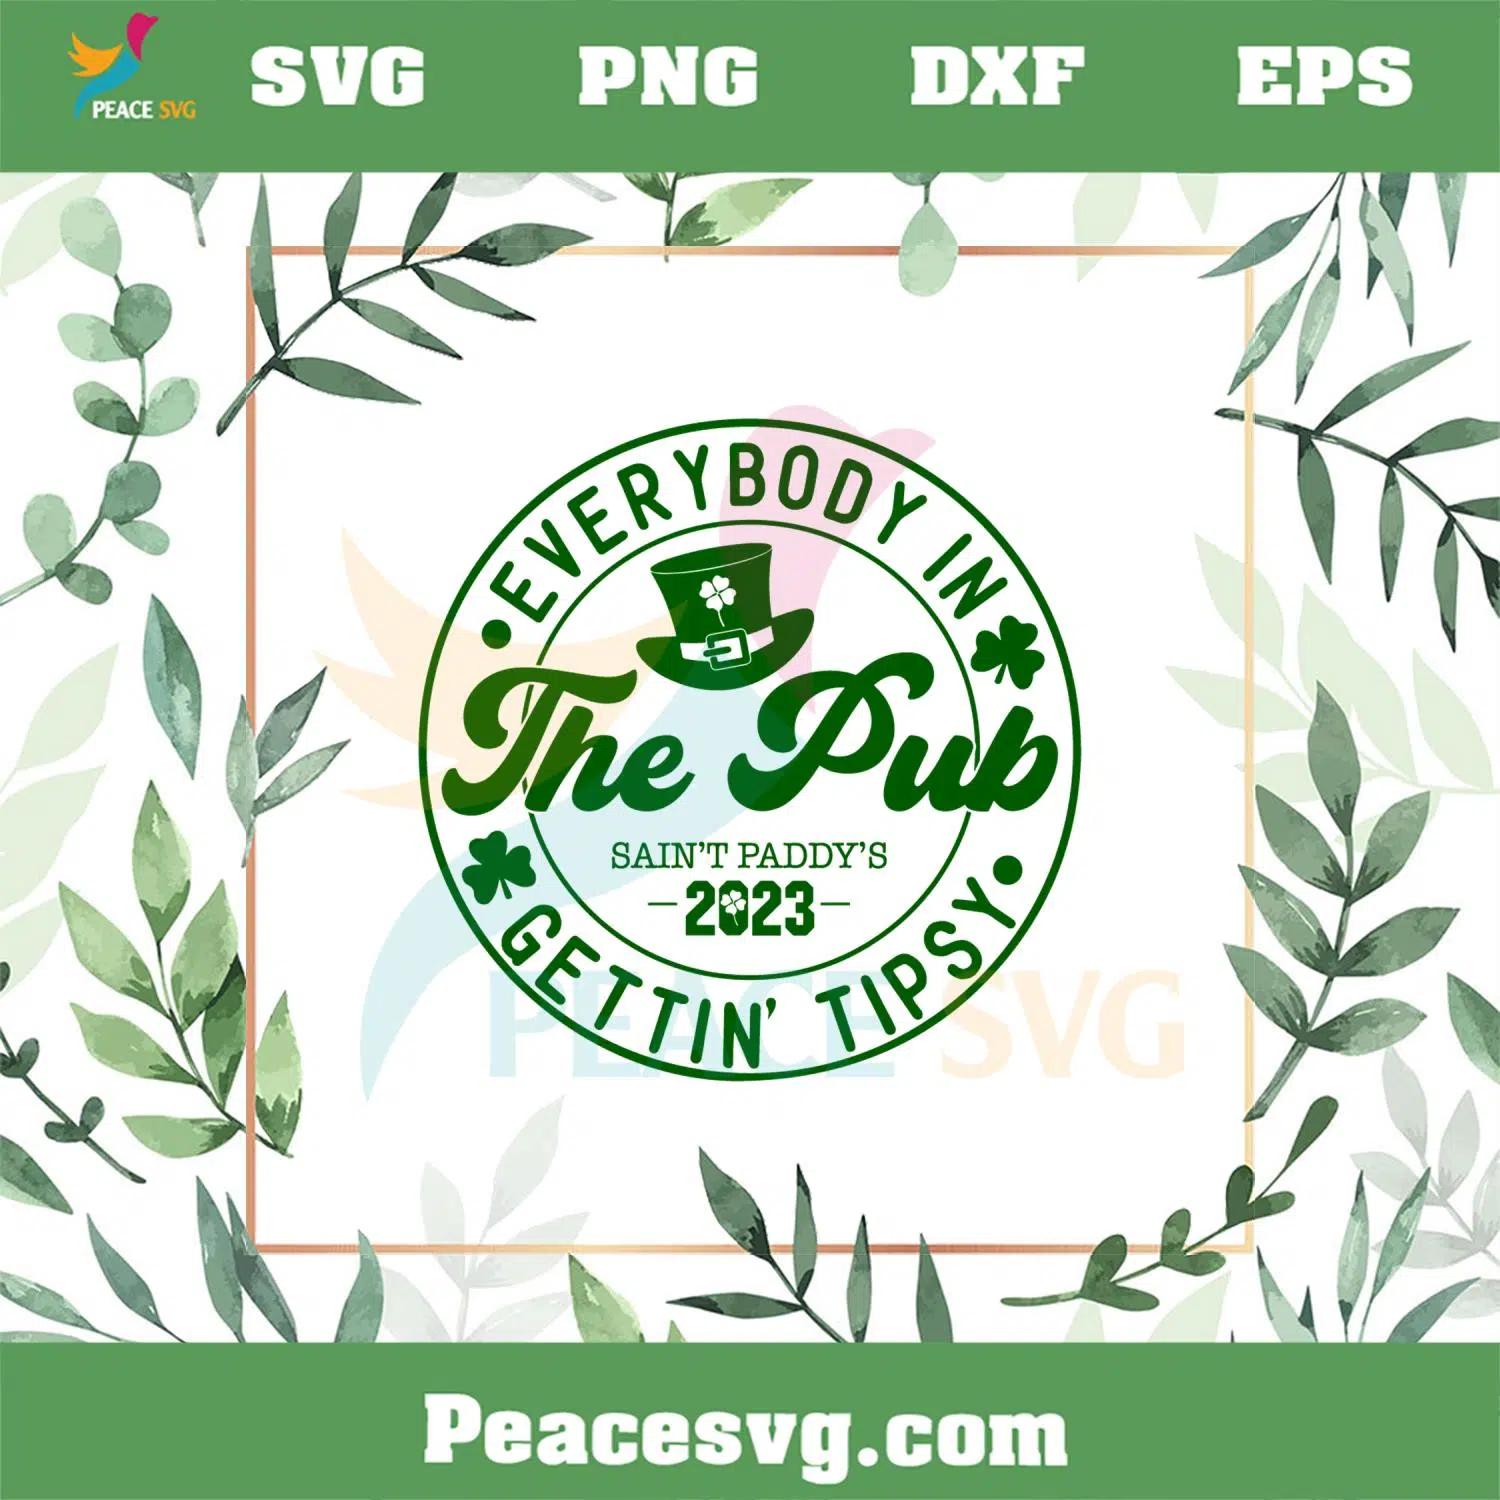 Everybody In The Pub Saint Paddys 2023 SVG Cutting Files